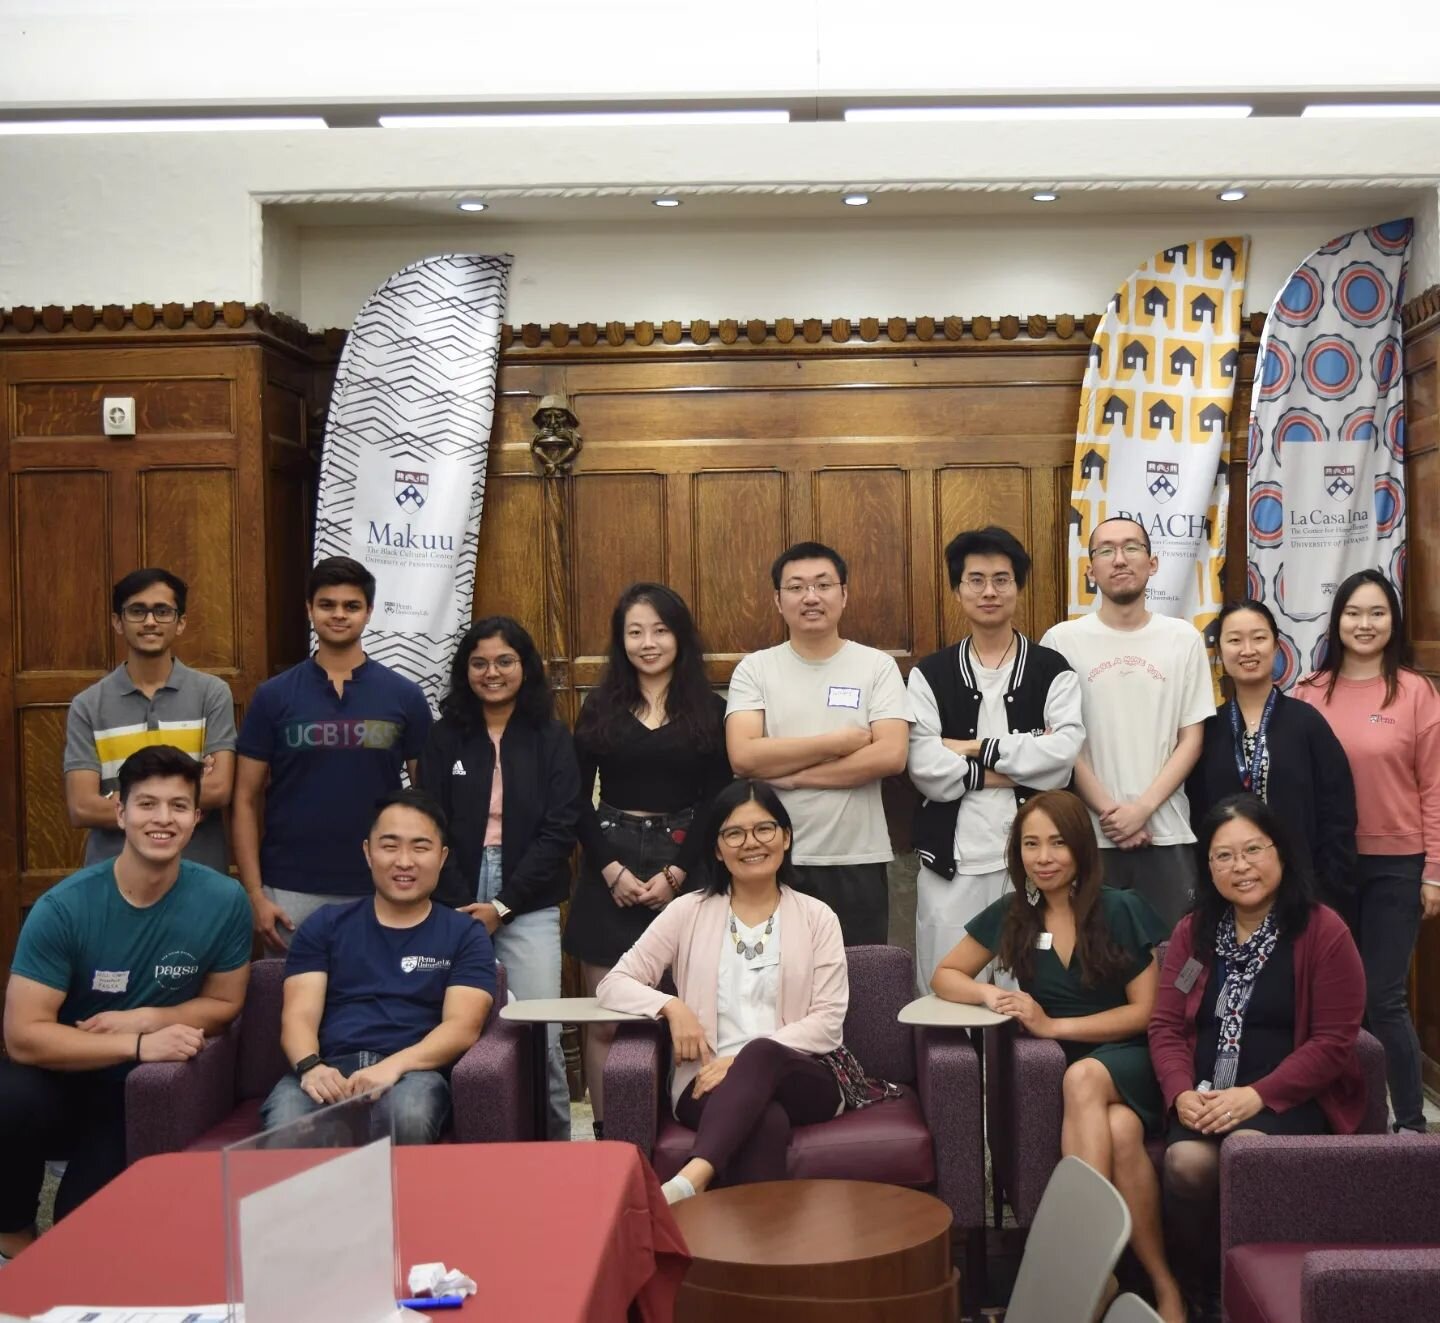 Thanks for joining us at the PAACH Graduate Open House last week! It was wonderful to meet and share food with graduate students new and old 💛 A big hand to @paachatupenn @cssap @rangoli_penn our partners in the event, and all of the volunteers who 